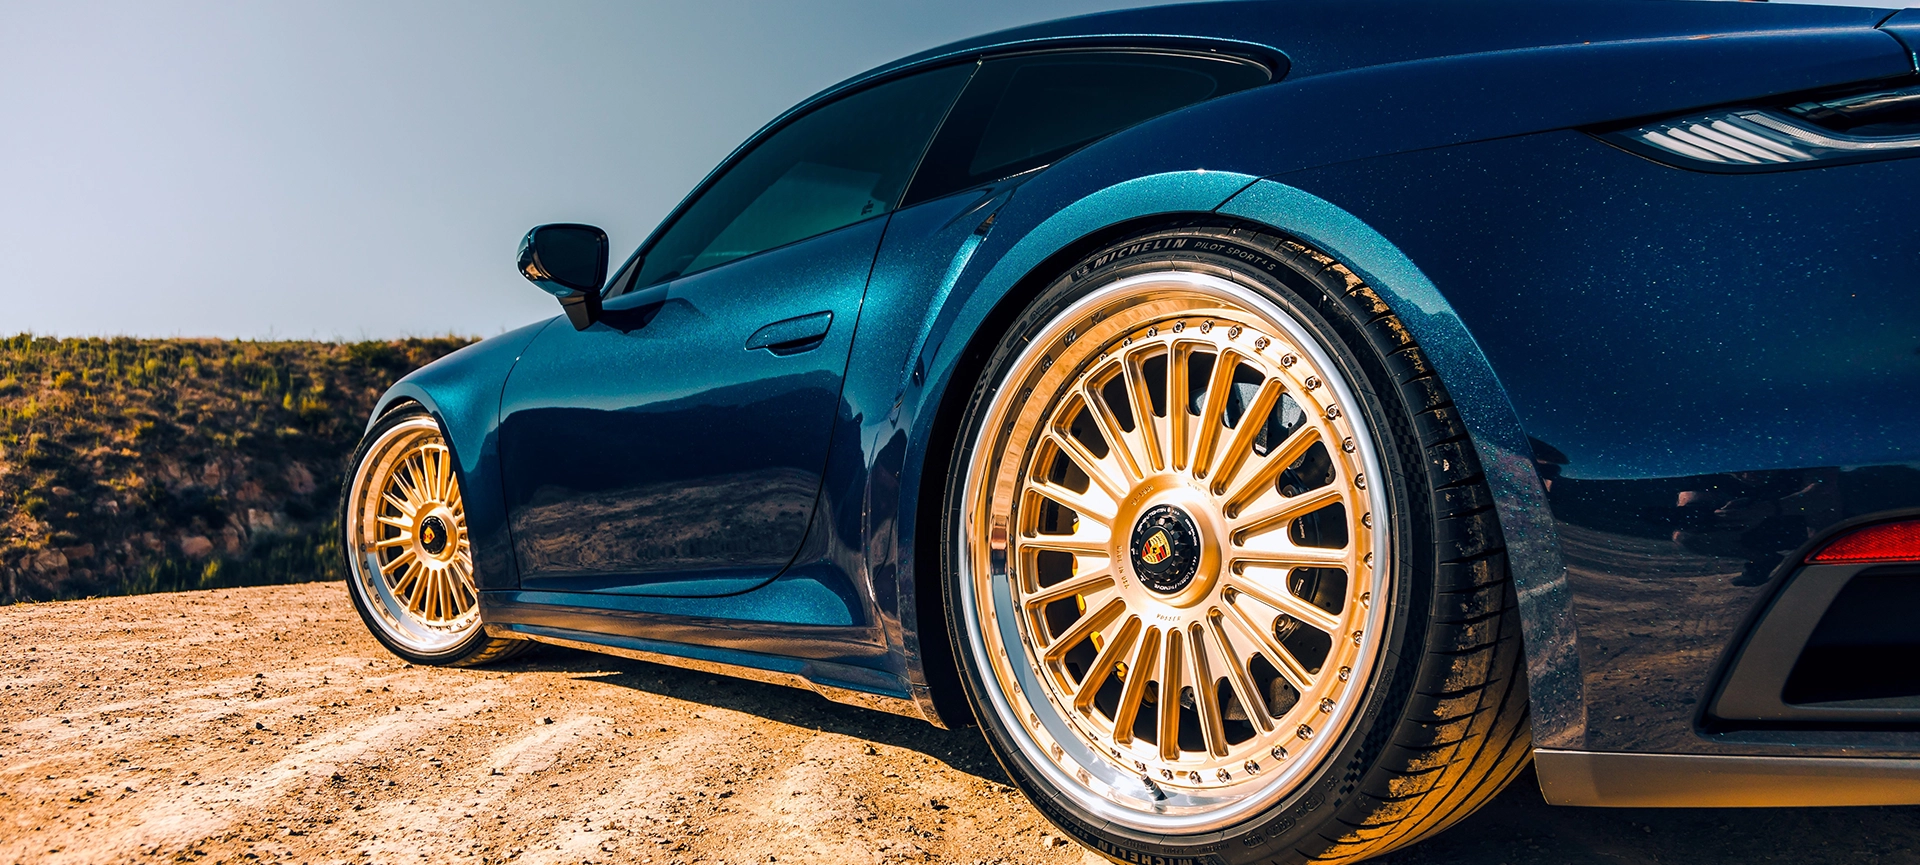 Tips for Maintaining Your Powder Coated Rims: Expert Advice from Rim Perfection